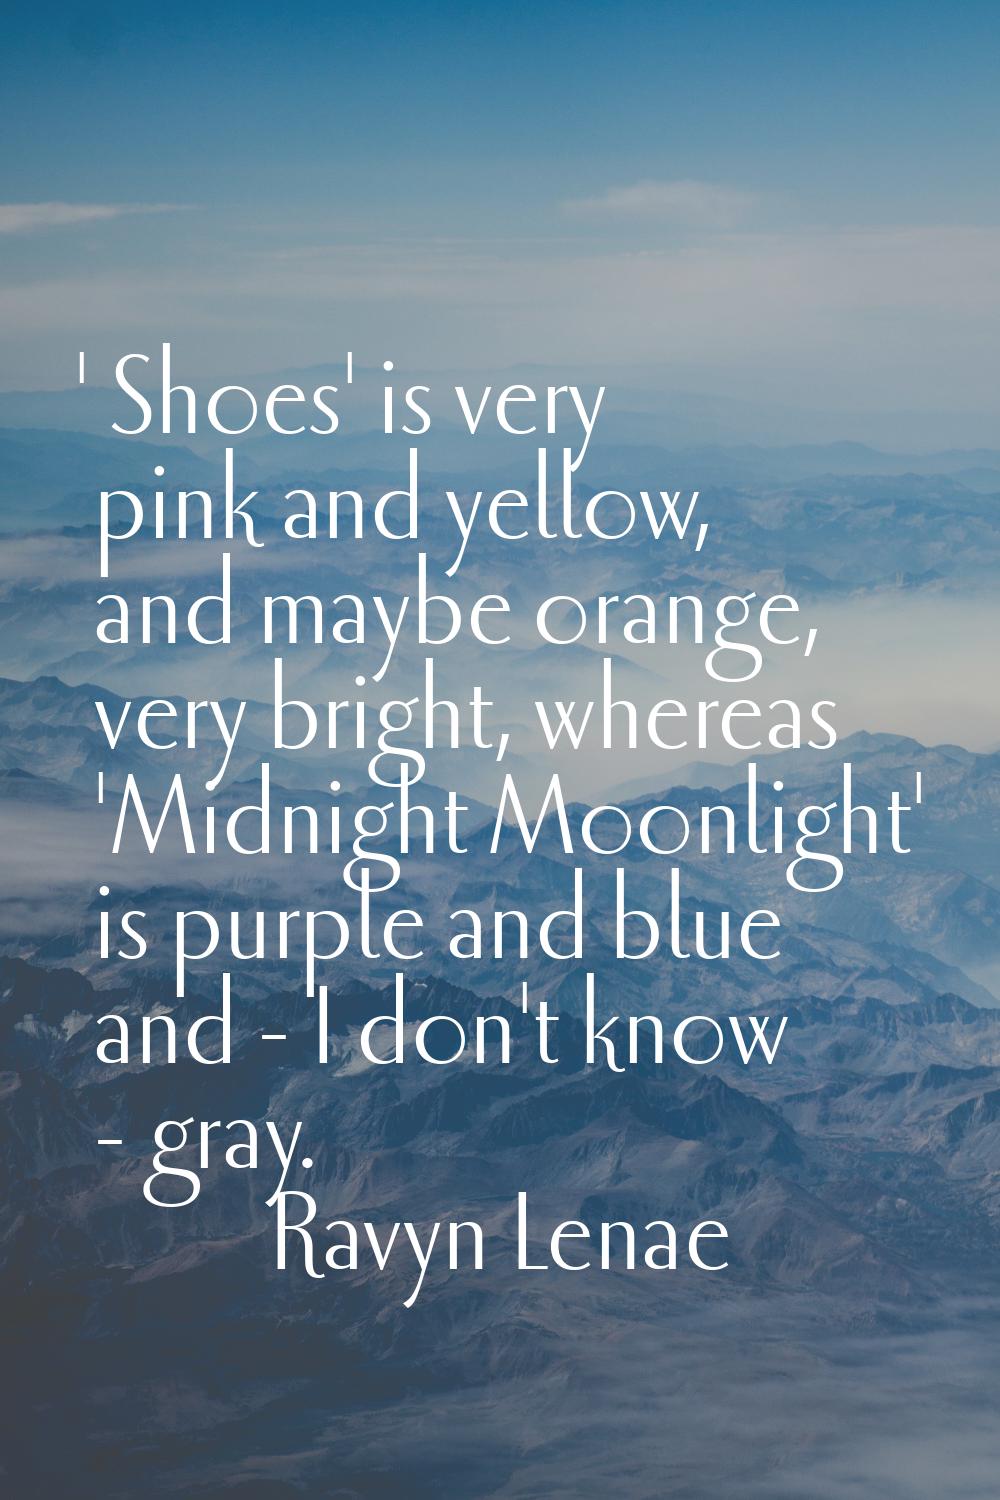 ' Shoes' is very pink and yellow, and maybe orange, very bright, whereas 'Midnight Moonlight' is pu